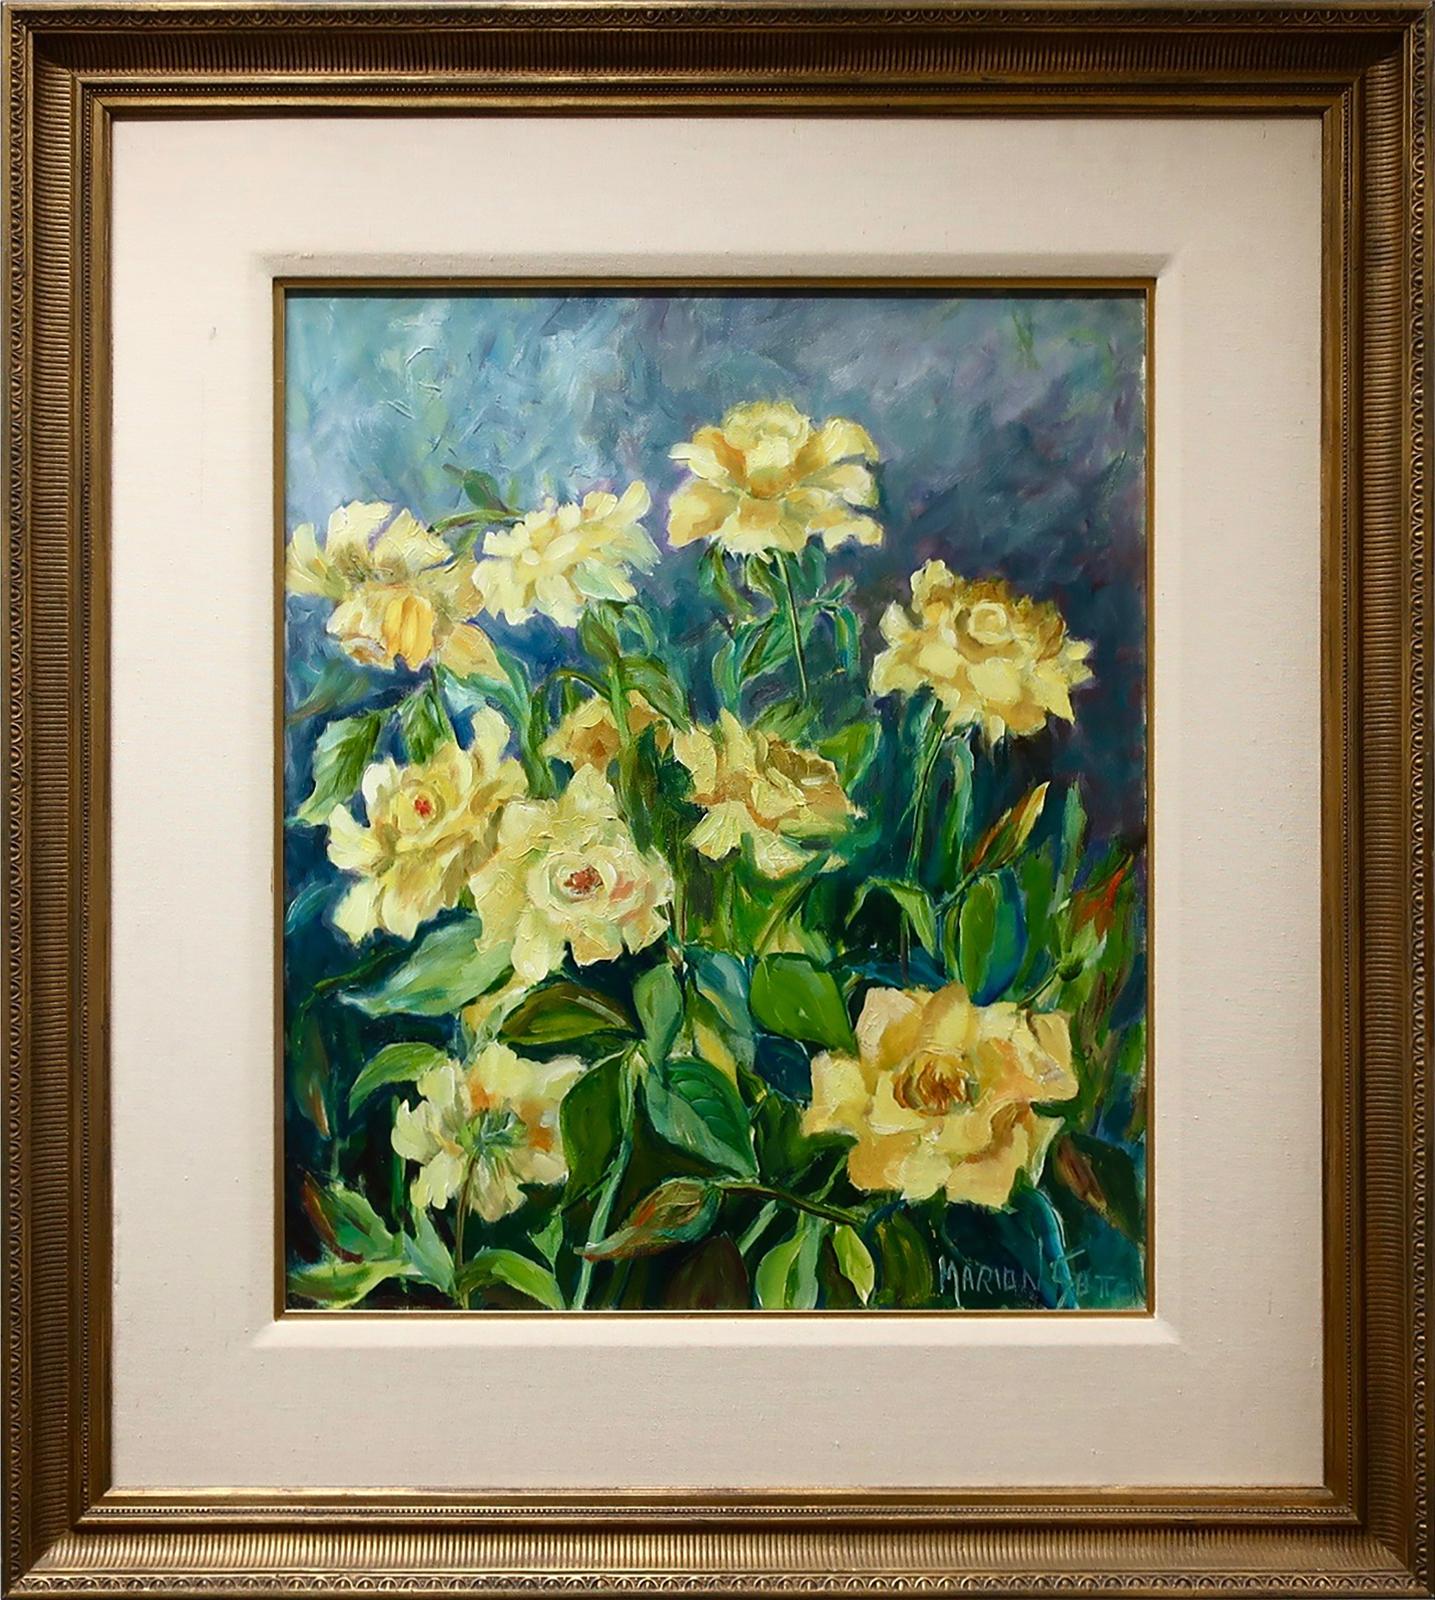 Marion Isobel Sutton (1922-2011) - Untitled (Yellow Flowers)